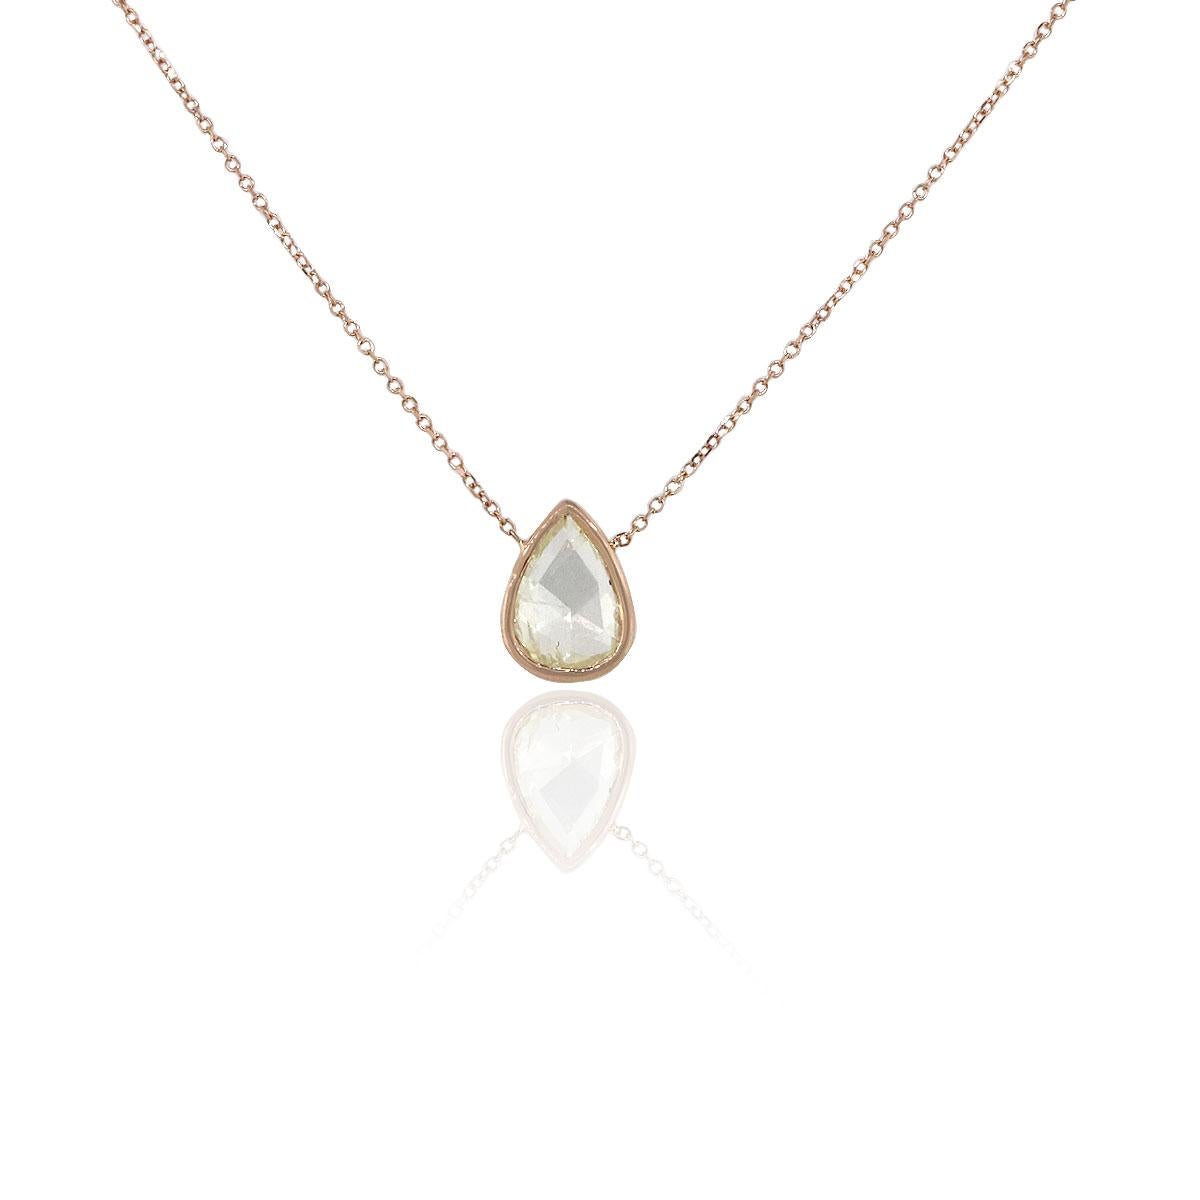 Material: 14k Rose Gold
Diamond Details: Approx. 1.45ctw Pear Shaped diamond. Diamond is G/H in color and VS in clarity
Measurements: Necklace measures 16